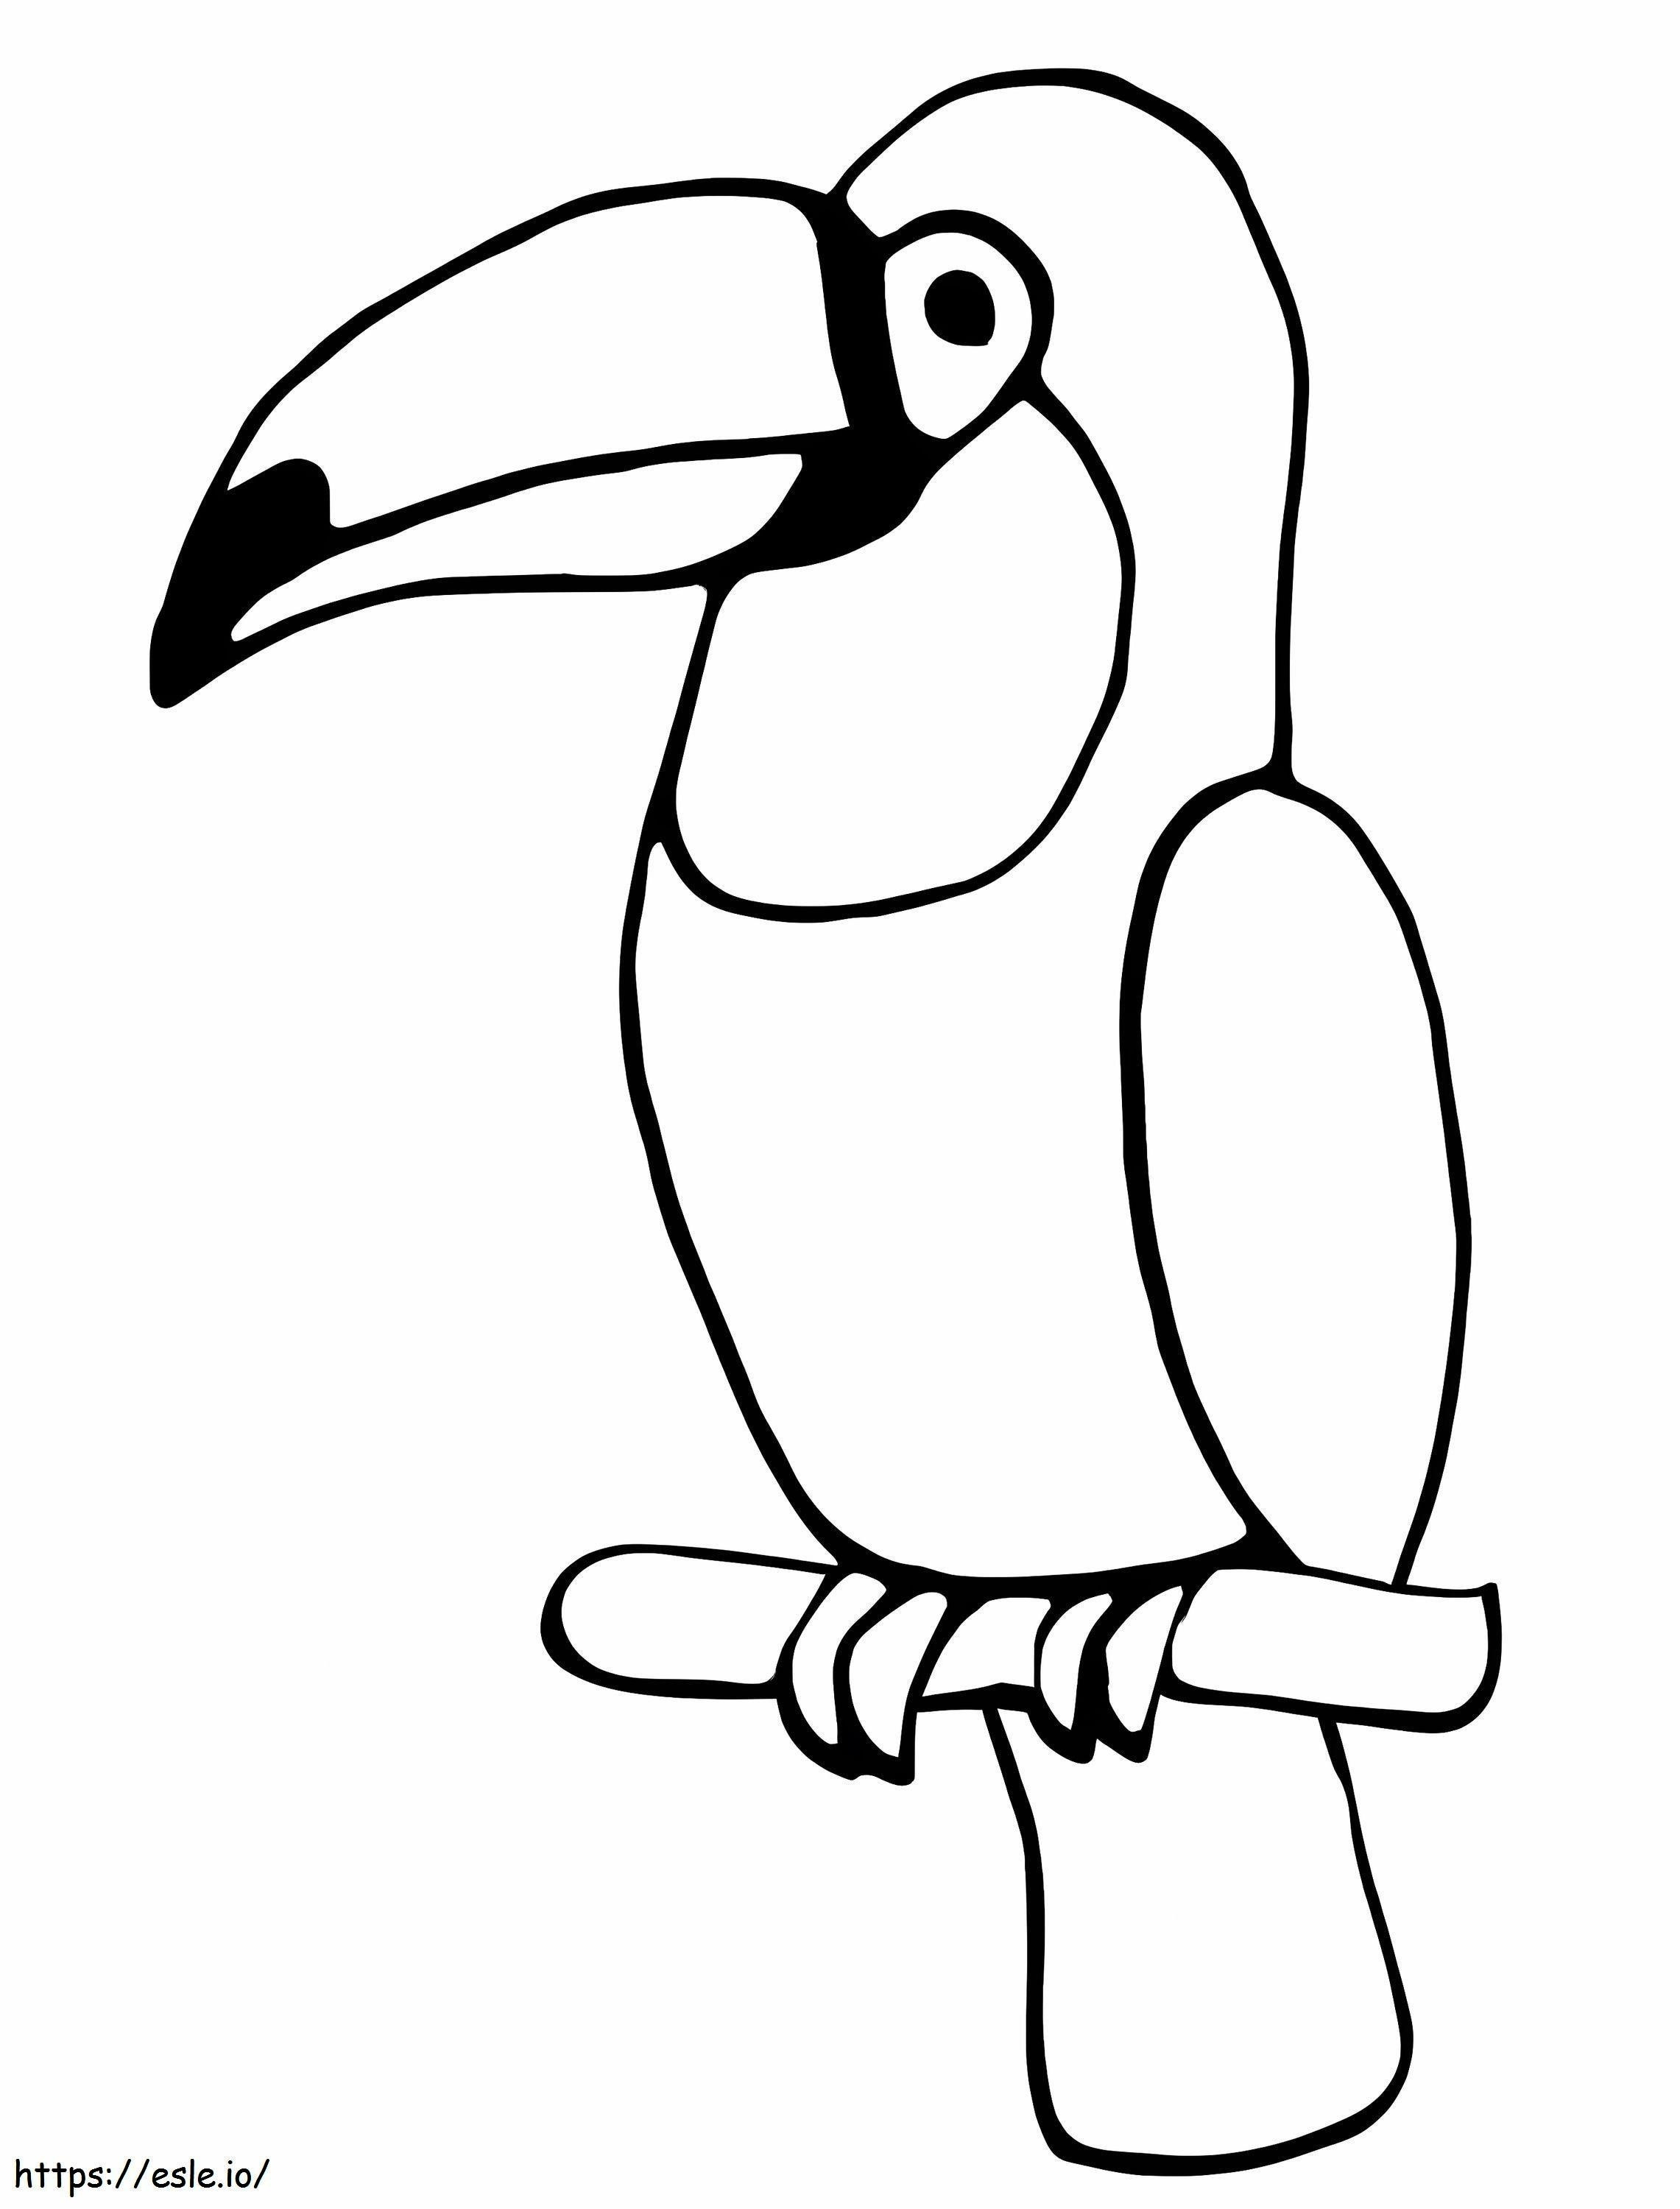 Normal Toucan Bird coloring page